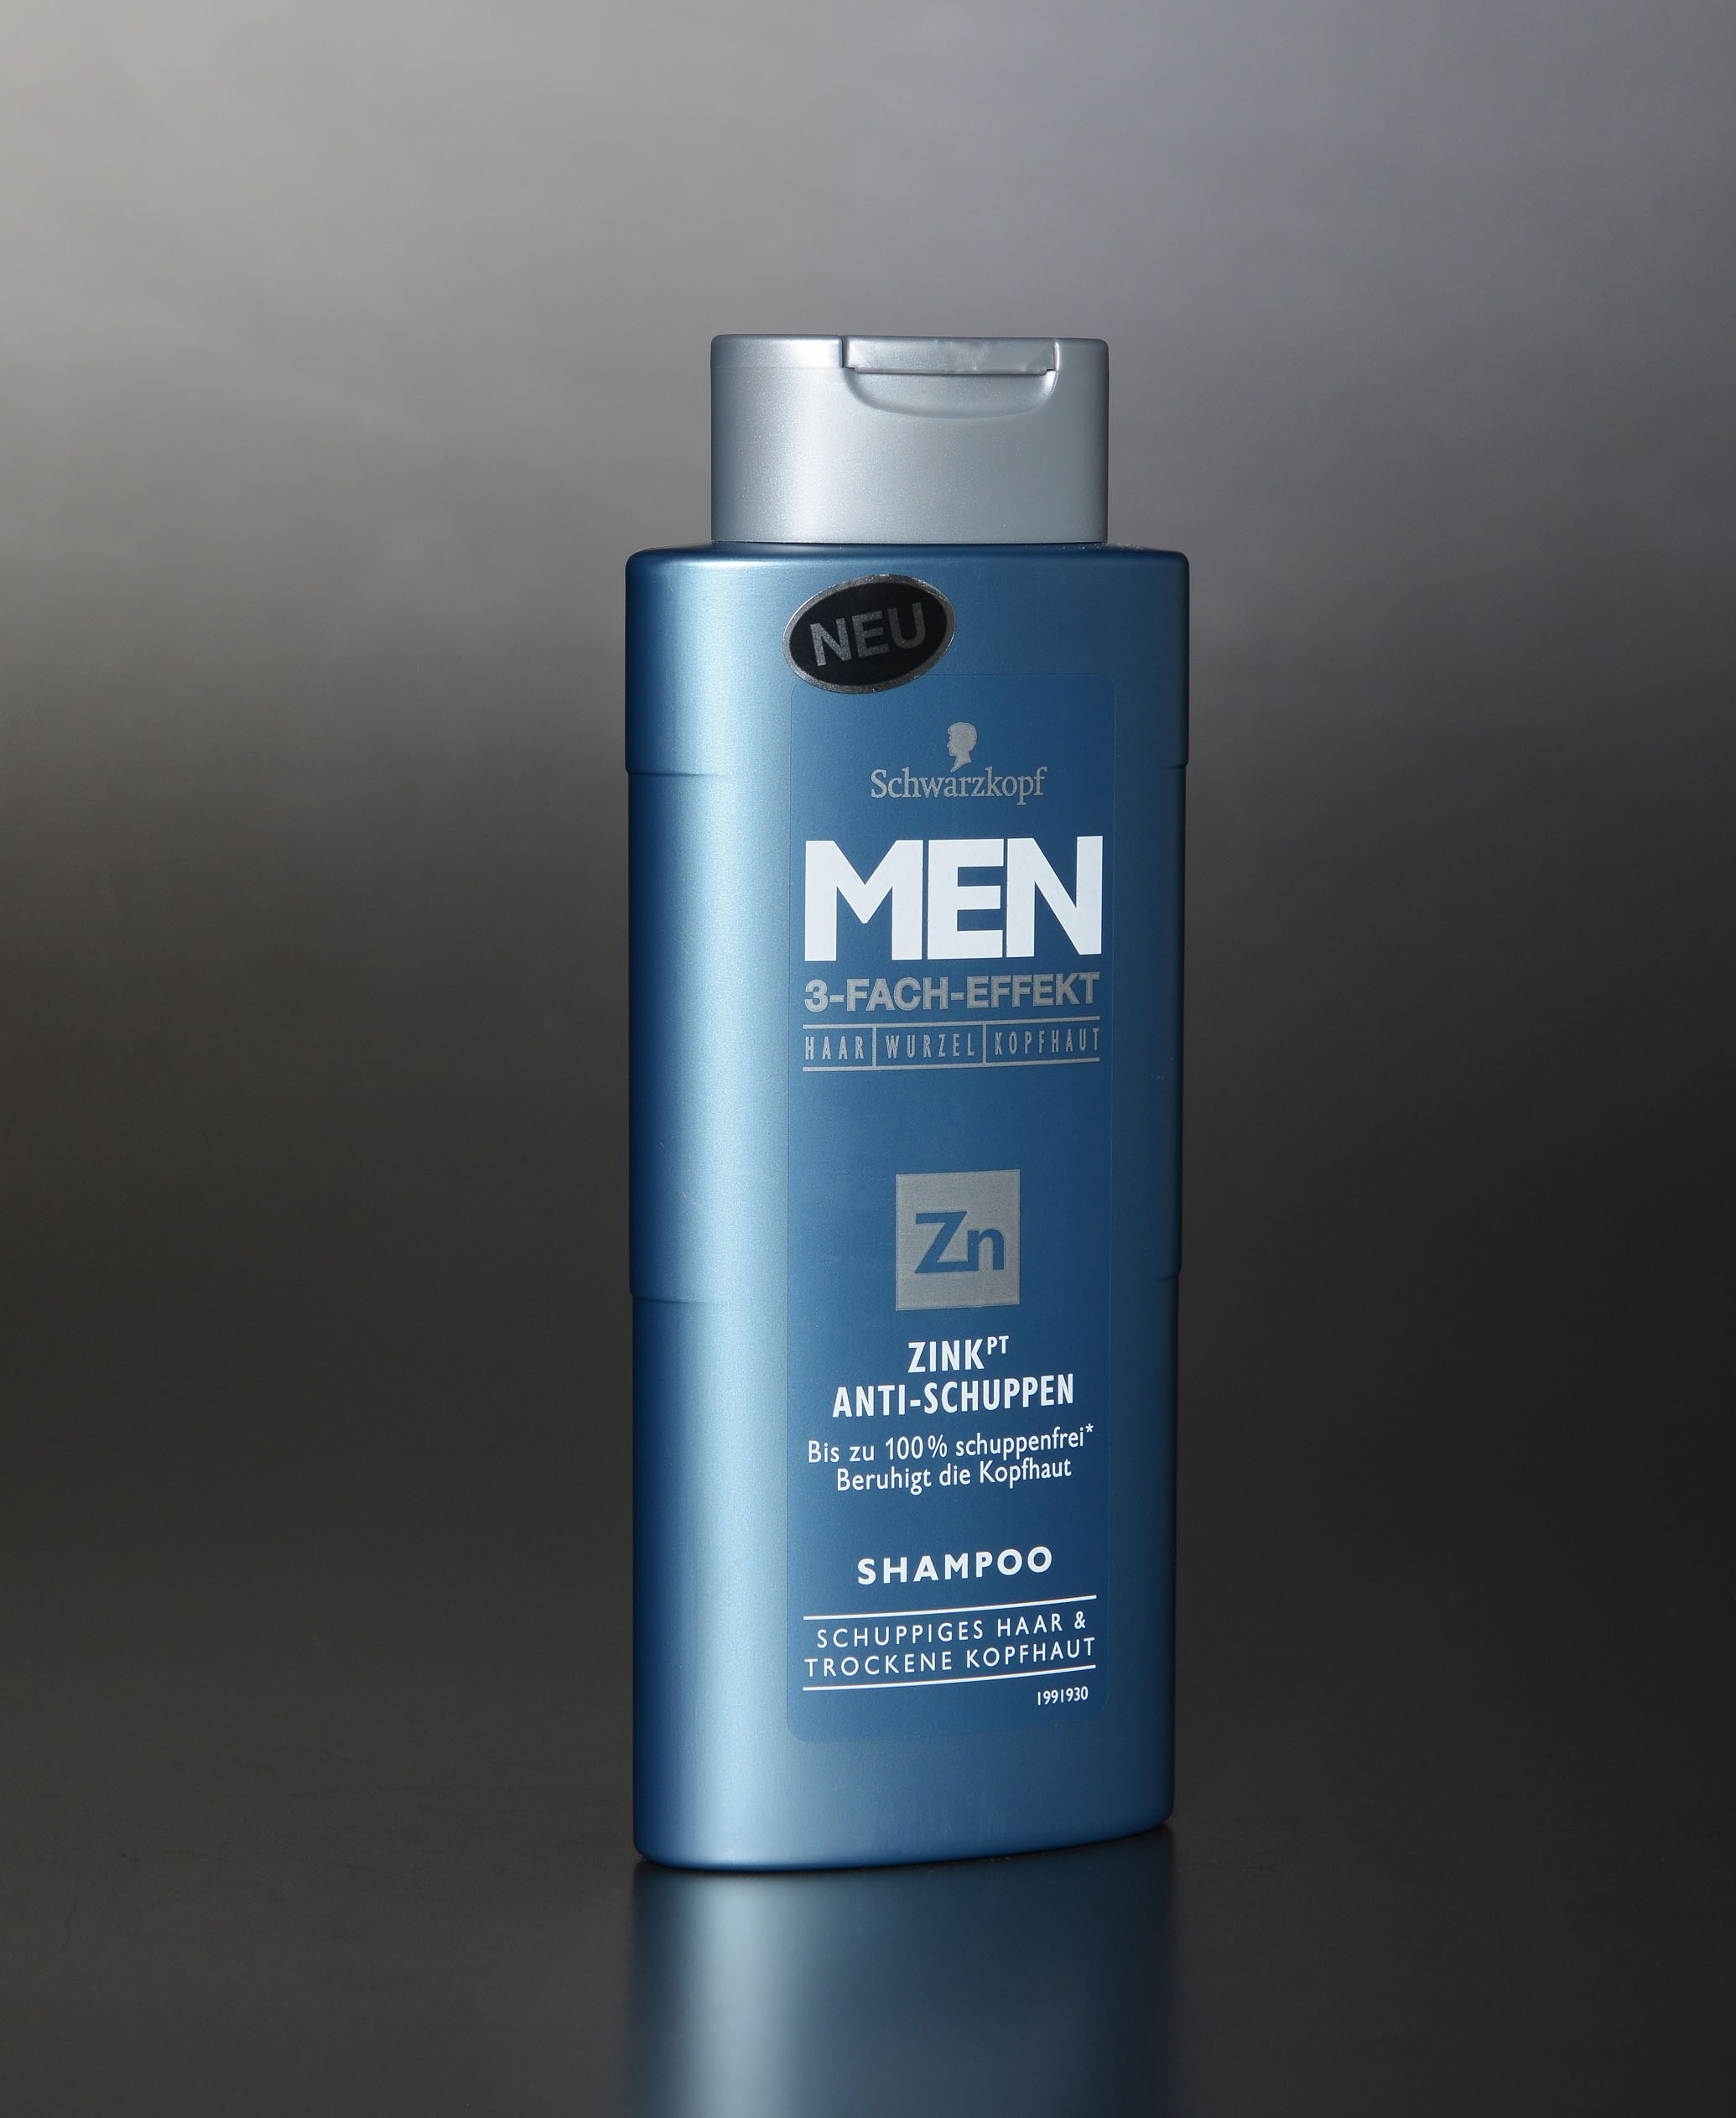 Benodigdheden Twisted klein RPC creates more for men with new shampoo bottle